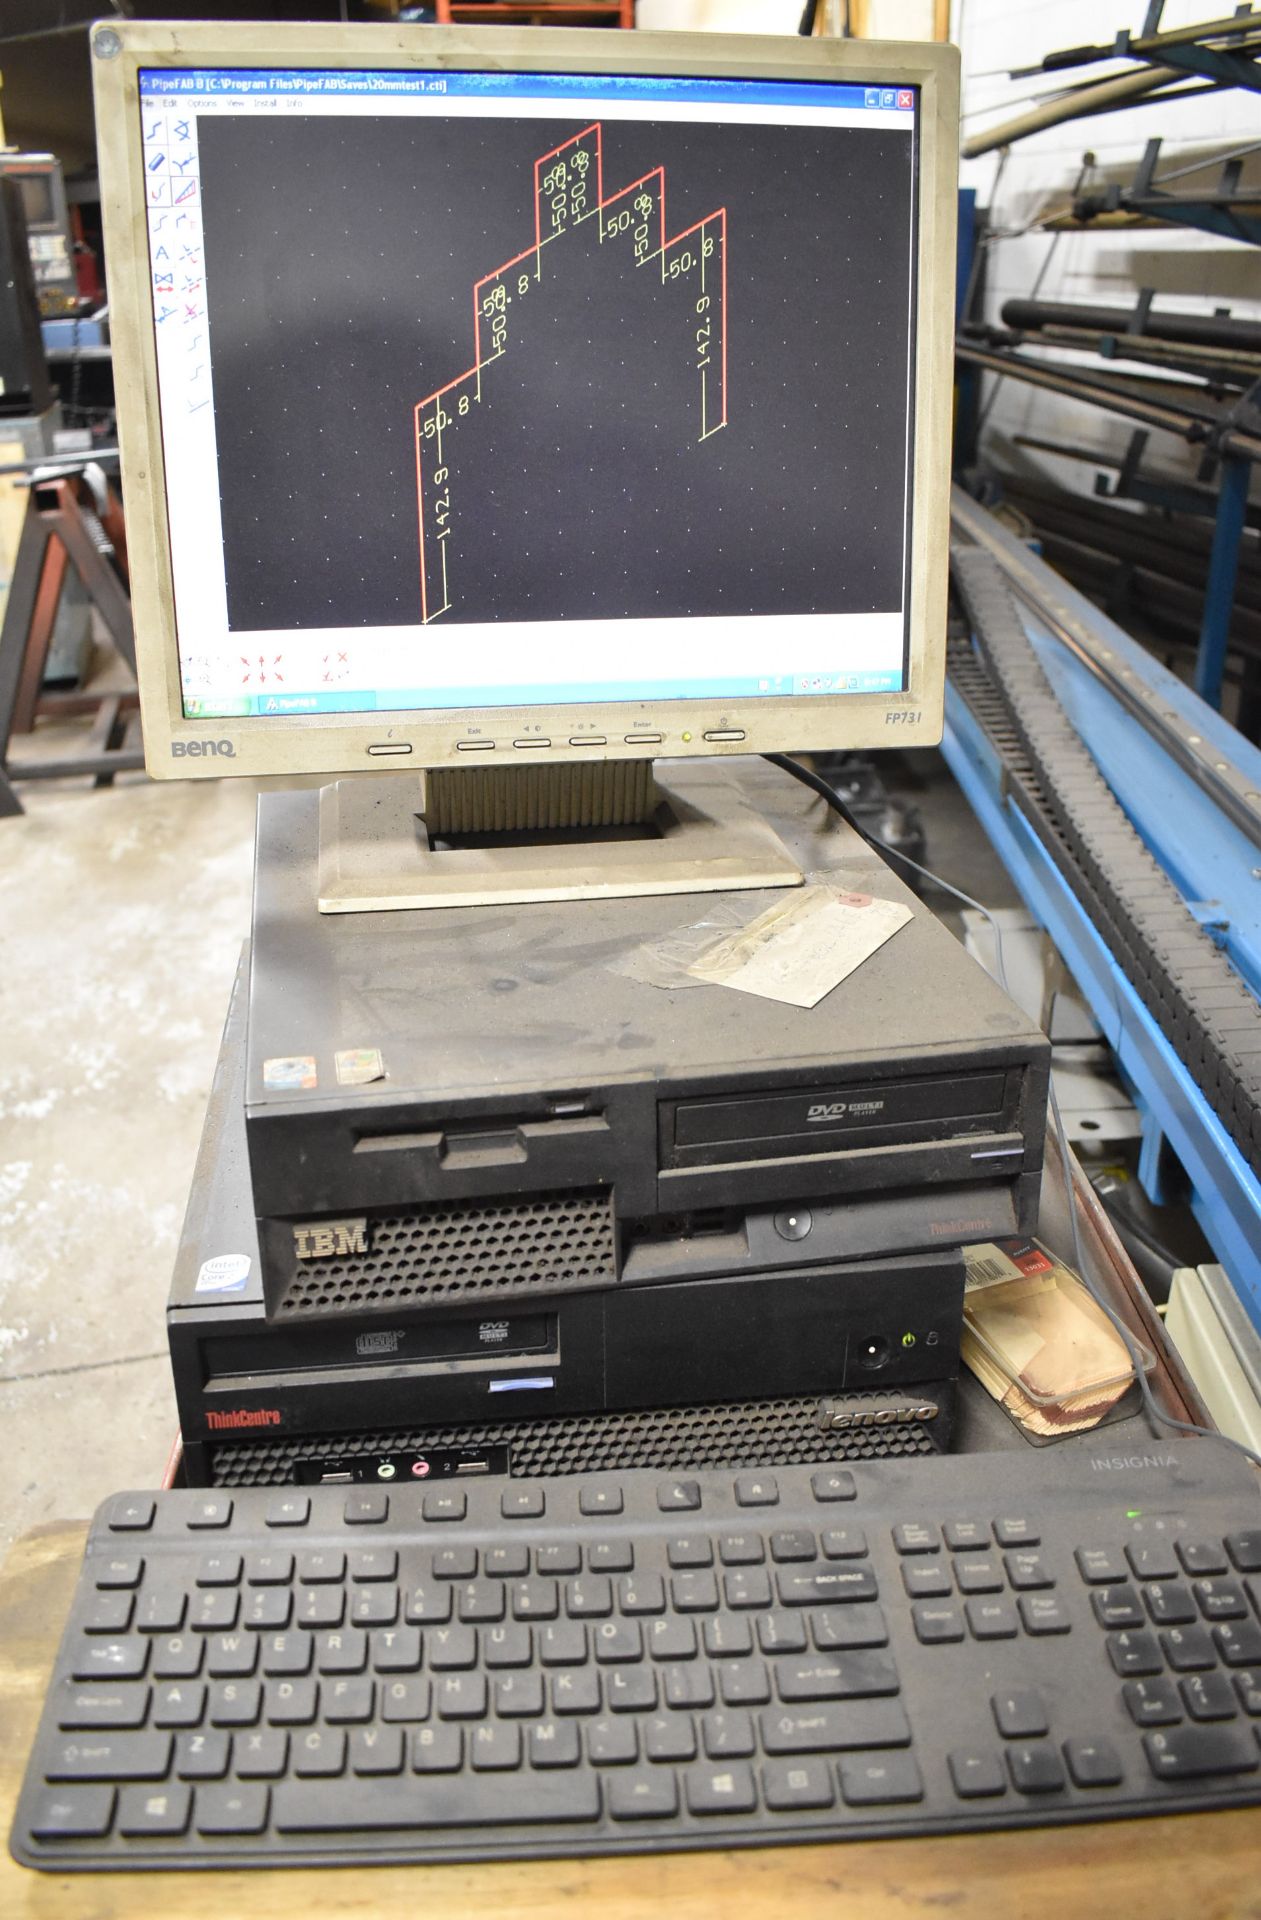 TRACTO-TECHNIK TUBOTRONIC CNC PIPE BENDER WITH 0.78"-3"X0.11" CAPACITY, UP TO 180 DEG. BENDING - Image 3 of 8